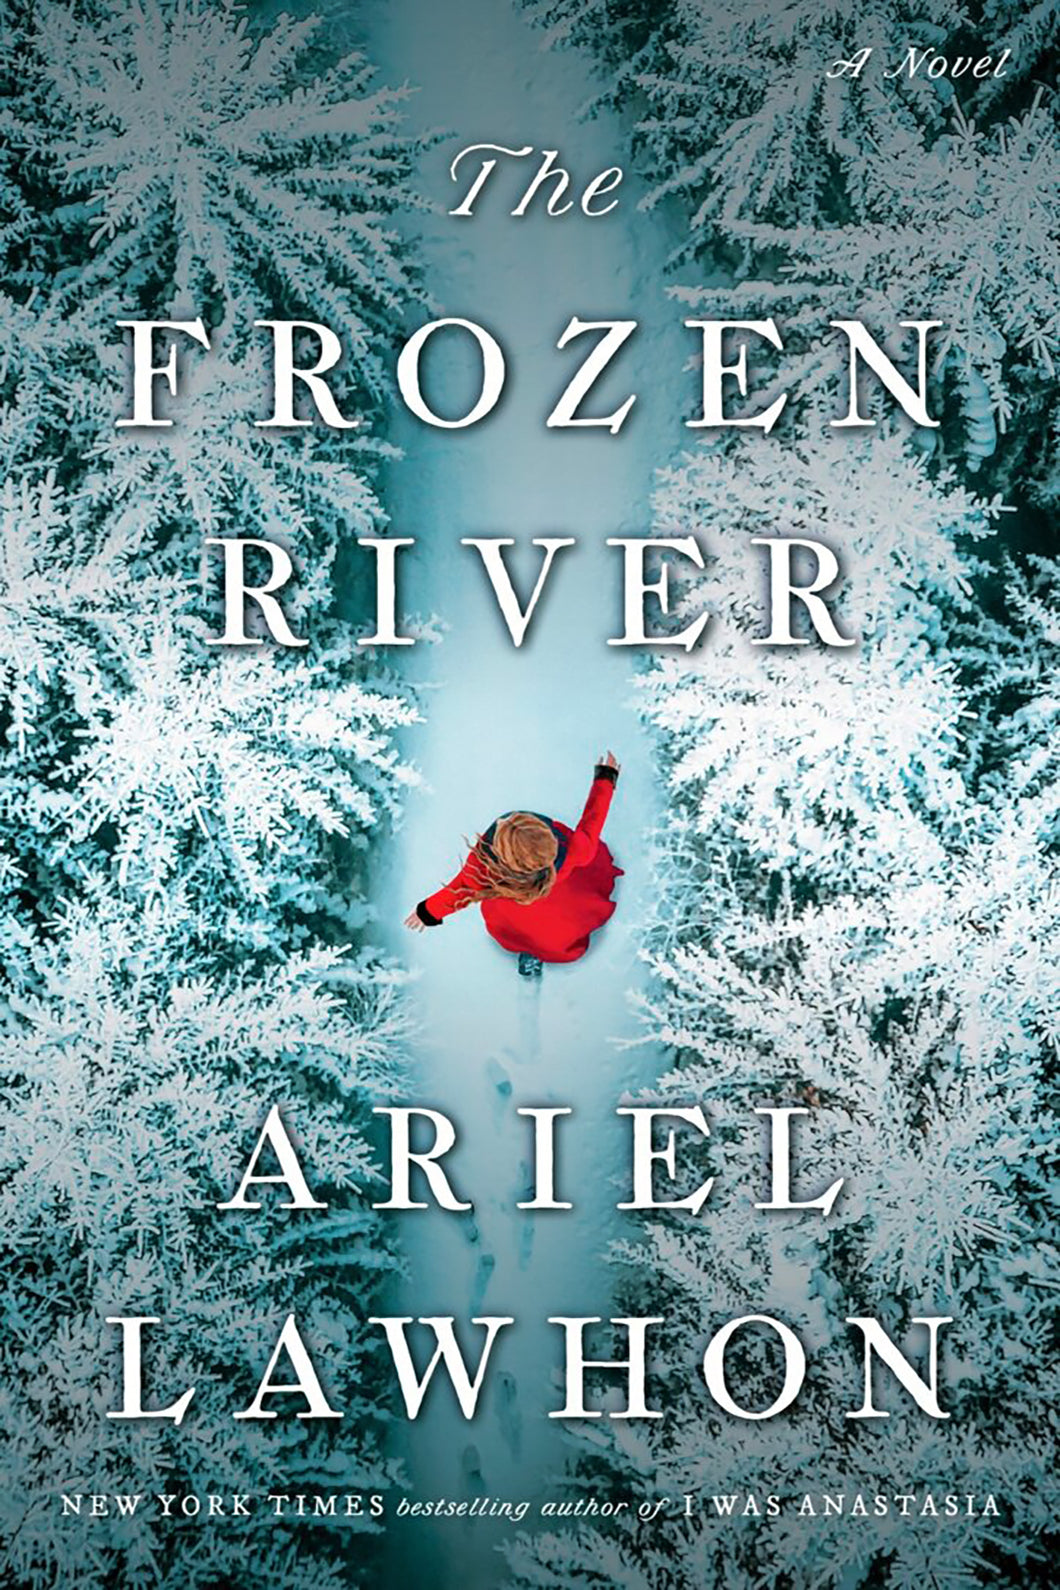 The Frozen River by Ariel Lawhon / BOOK OR BUNDLE - Starting at $28!